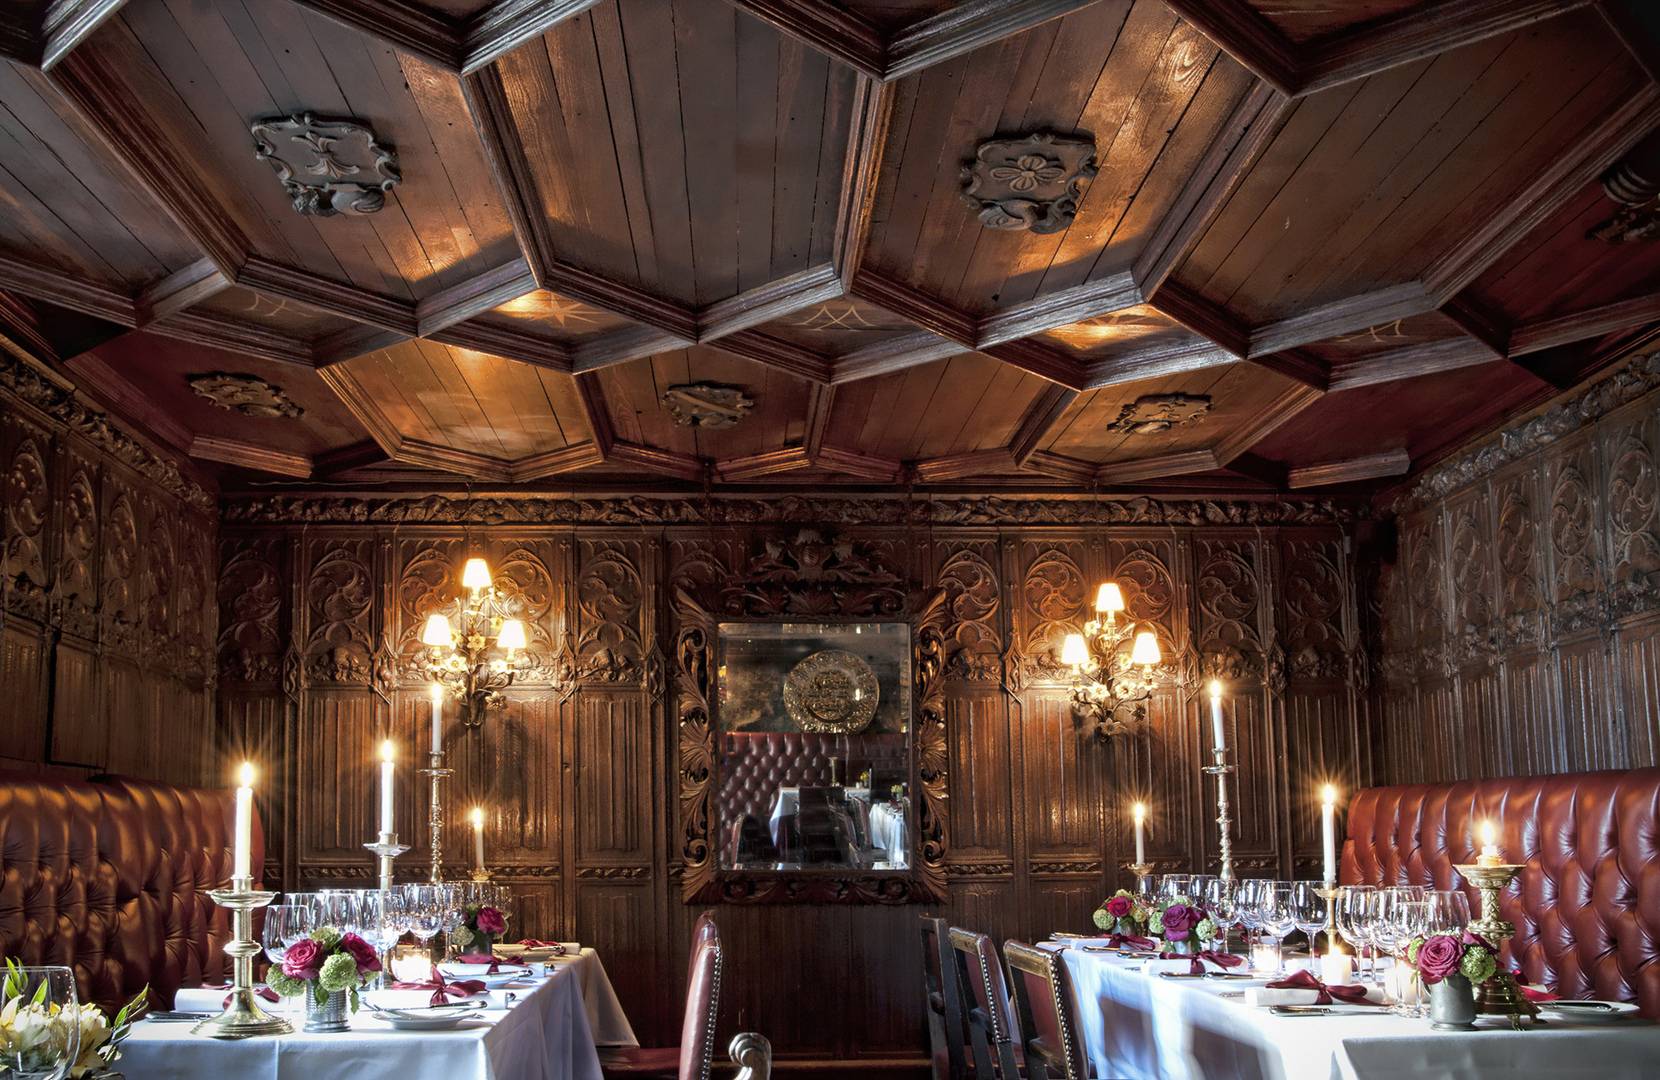 The Original Dining Room at The Witchery by the Castle, The Witchery by the Castle